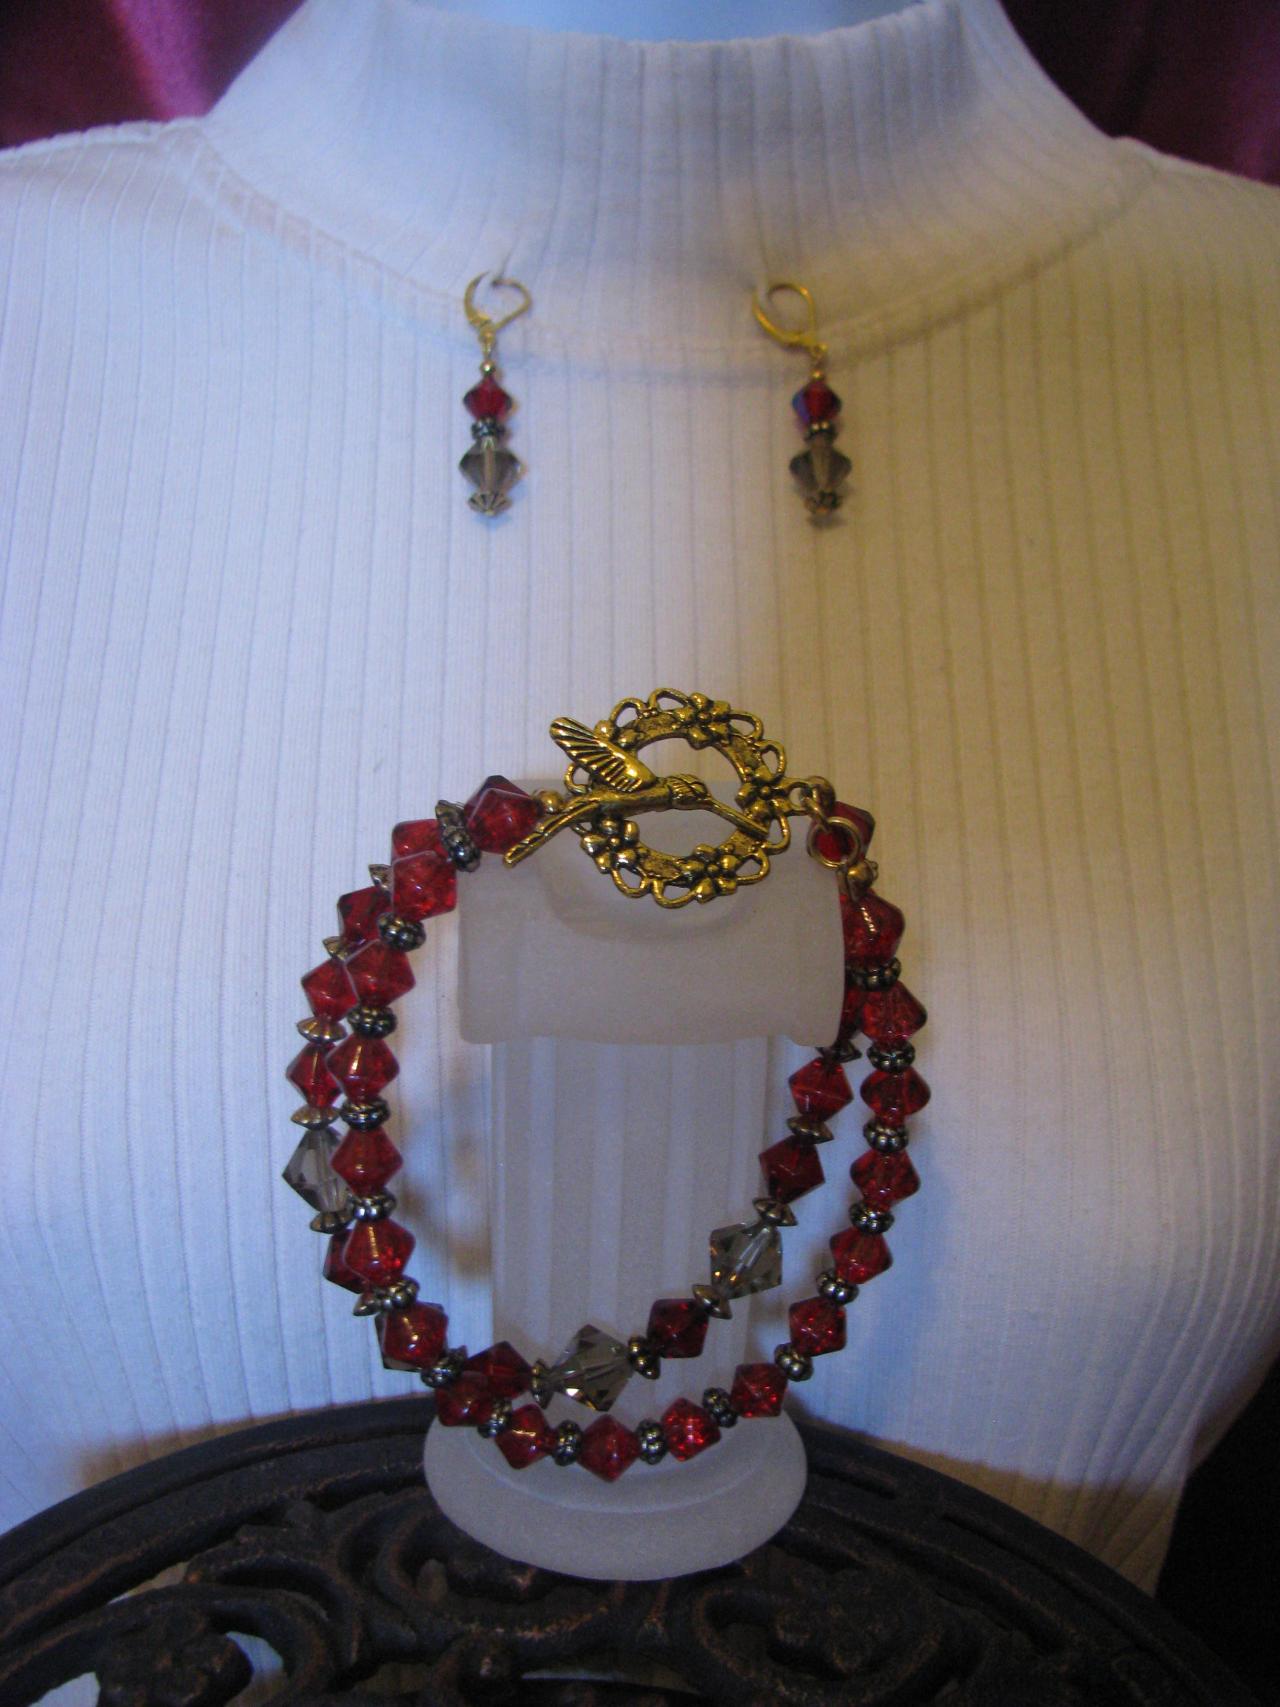 10 Off 2set Dual Strand Bracelet With Beautiful Hummingbird Toggle Clasp And Matching Red Bead Earrings Great Valentines Gift